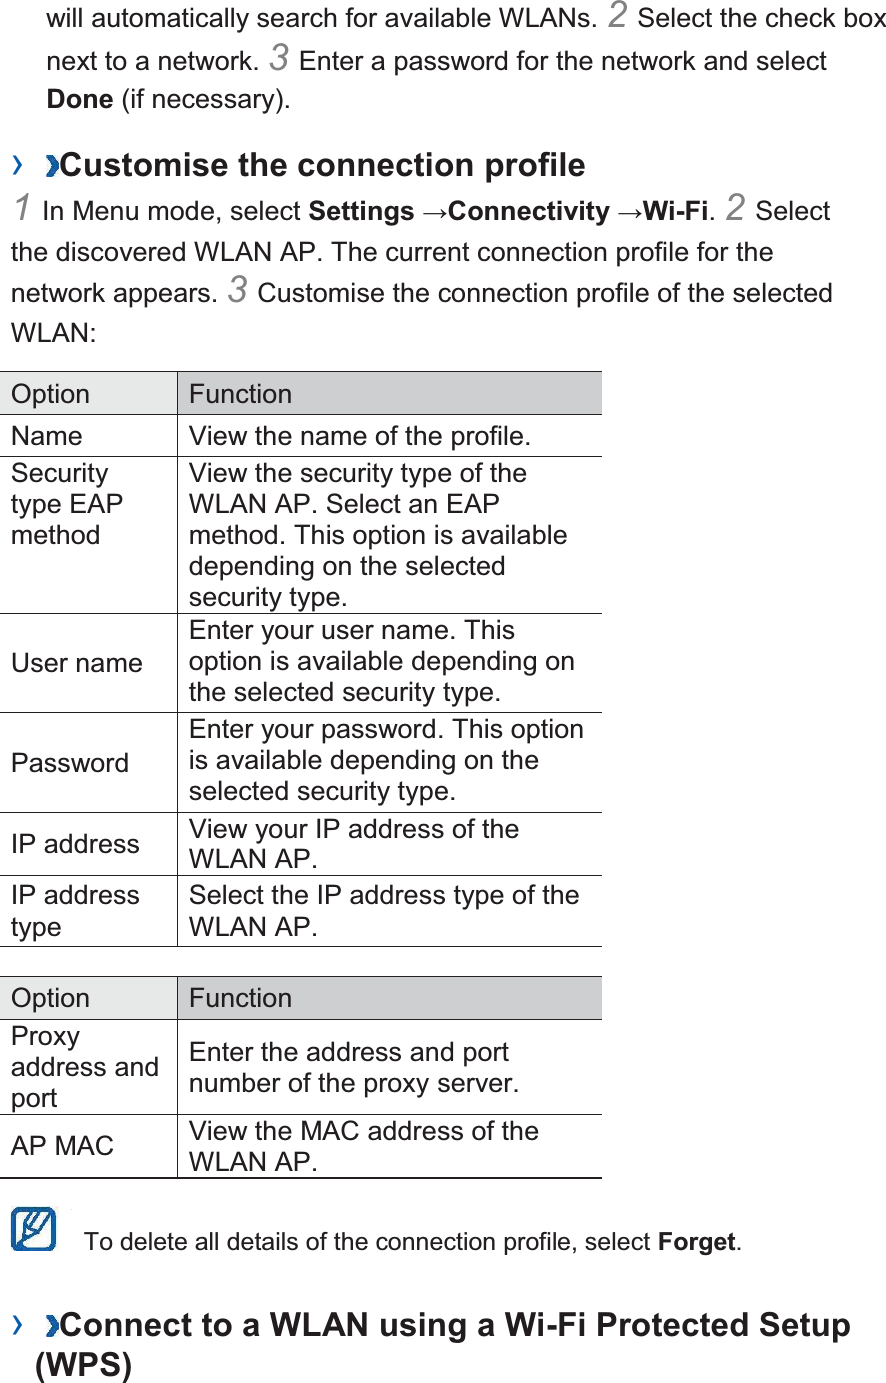 will automatically search for available WLANs. 2 Select the check box next to a network. 3 Enter a password for the network and select Done (if necessary).   ›  Customise the connection profile   1 In Menu mode, select Settings →Connectivity →Wi-Fi. 2 Select the discovered WLAN AP. The current connection profile for the network appears. 3 Customise the connection profile of the selected WLAN:  Option  Function  Name  View the name of the profile.   Security type EAP method  View the security type of the WLAN AP. Select an EAP method. This option is available depending on the selected security type.   User name   Enter your user name. This option is available depending on the selected security type.   Password  Enter your password. This option is available depending on the selected security type.   IP address   View your IP address of the WLAN AP.   IP address type  Select the IP address type of the WLAN AP.    Option  Function  Proxy address and port  Enter the address and port number of the proxy server.  AP MAC   View the MAC address of the WLAN AP.      To delete all details of the connection profile, select Forget.  ›  Connect to a WLAN using a Wi-Fi Protected Setup (WPS)   